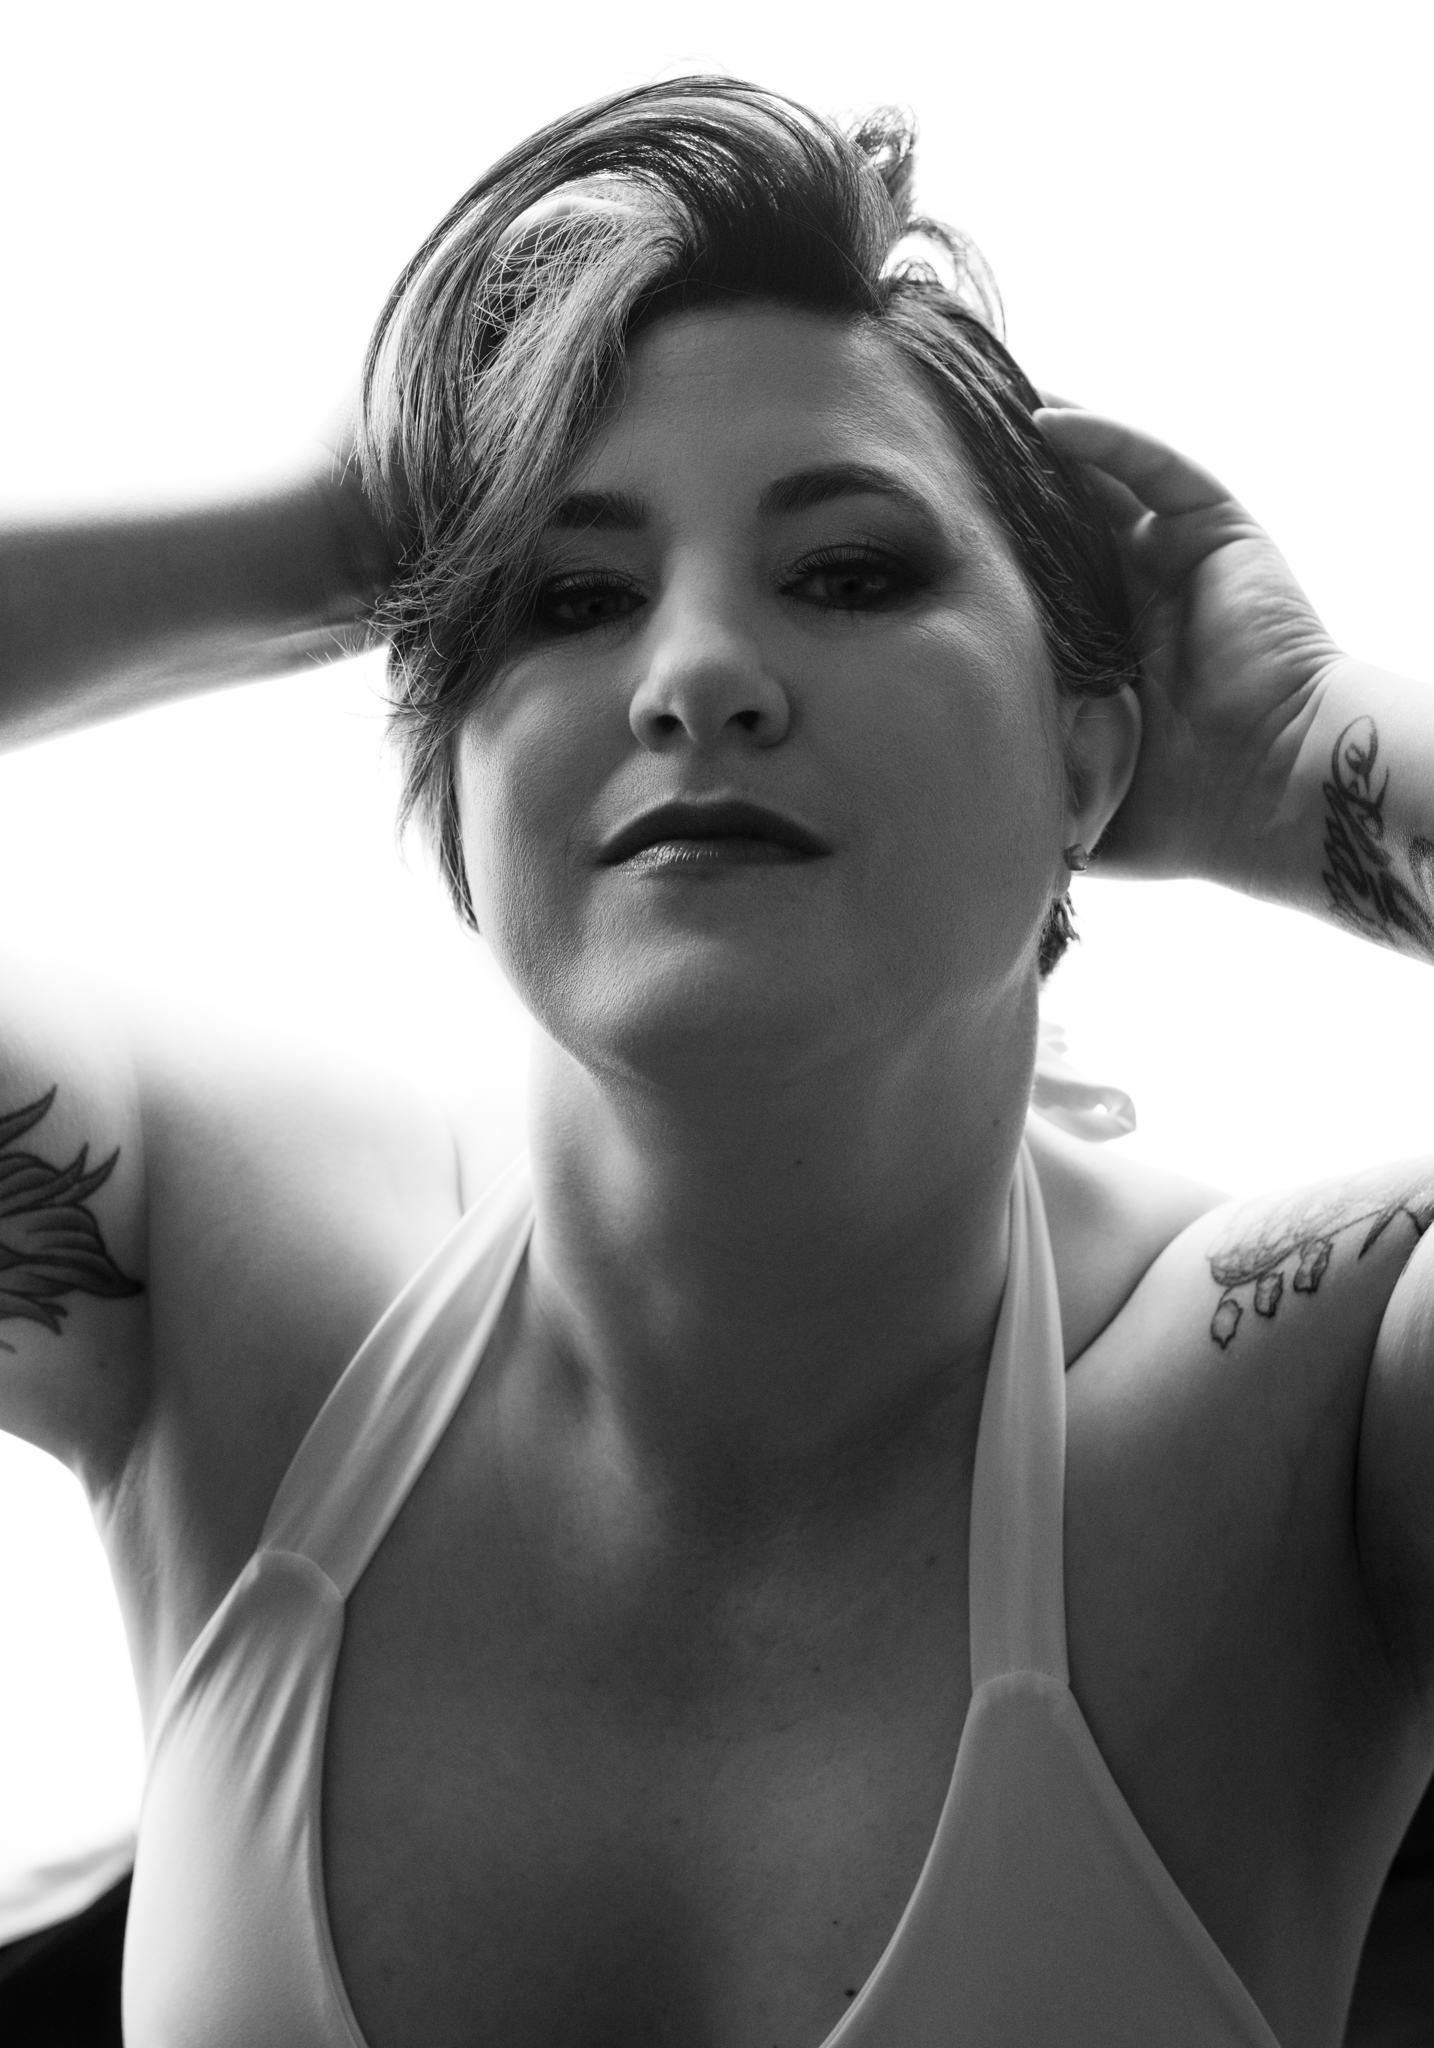 Woman with tattoos gazing directly into the camera